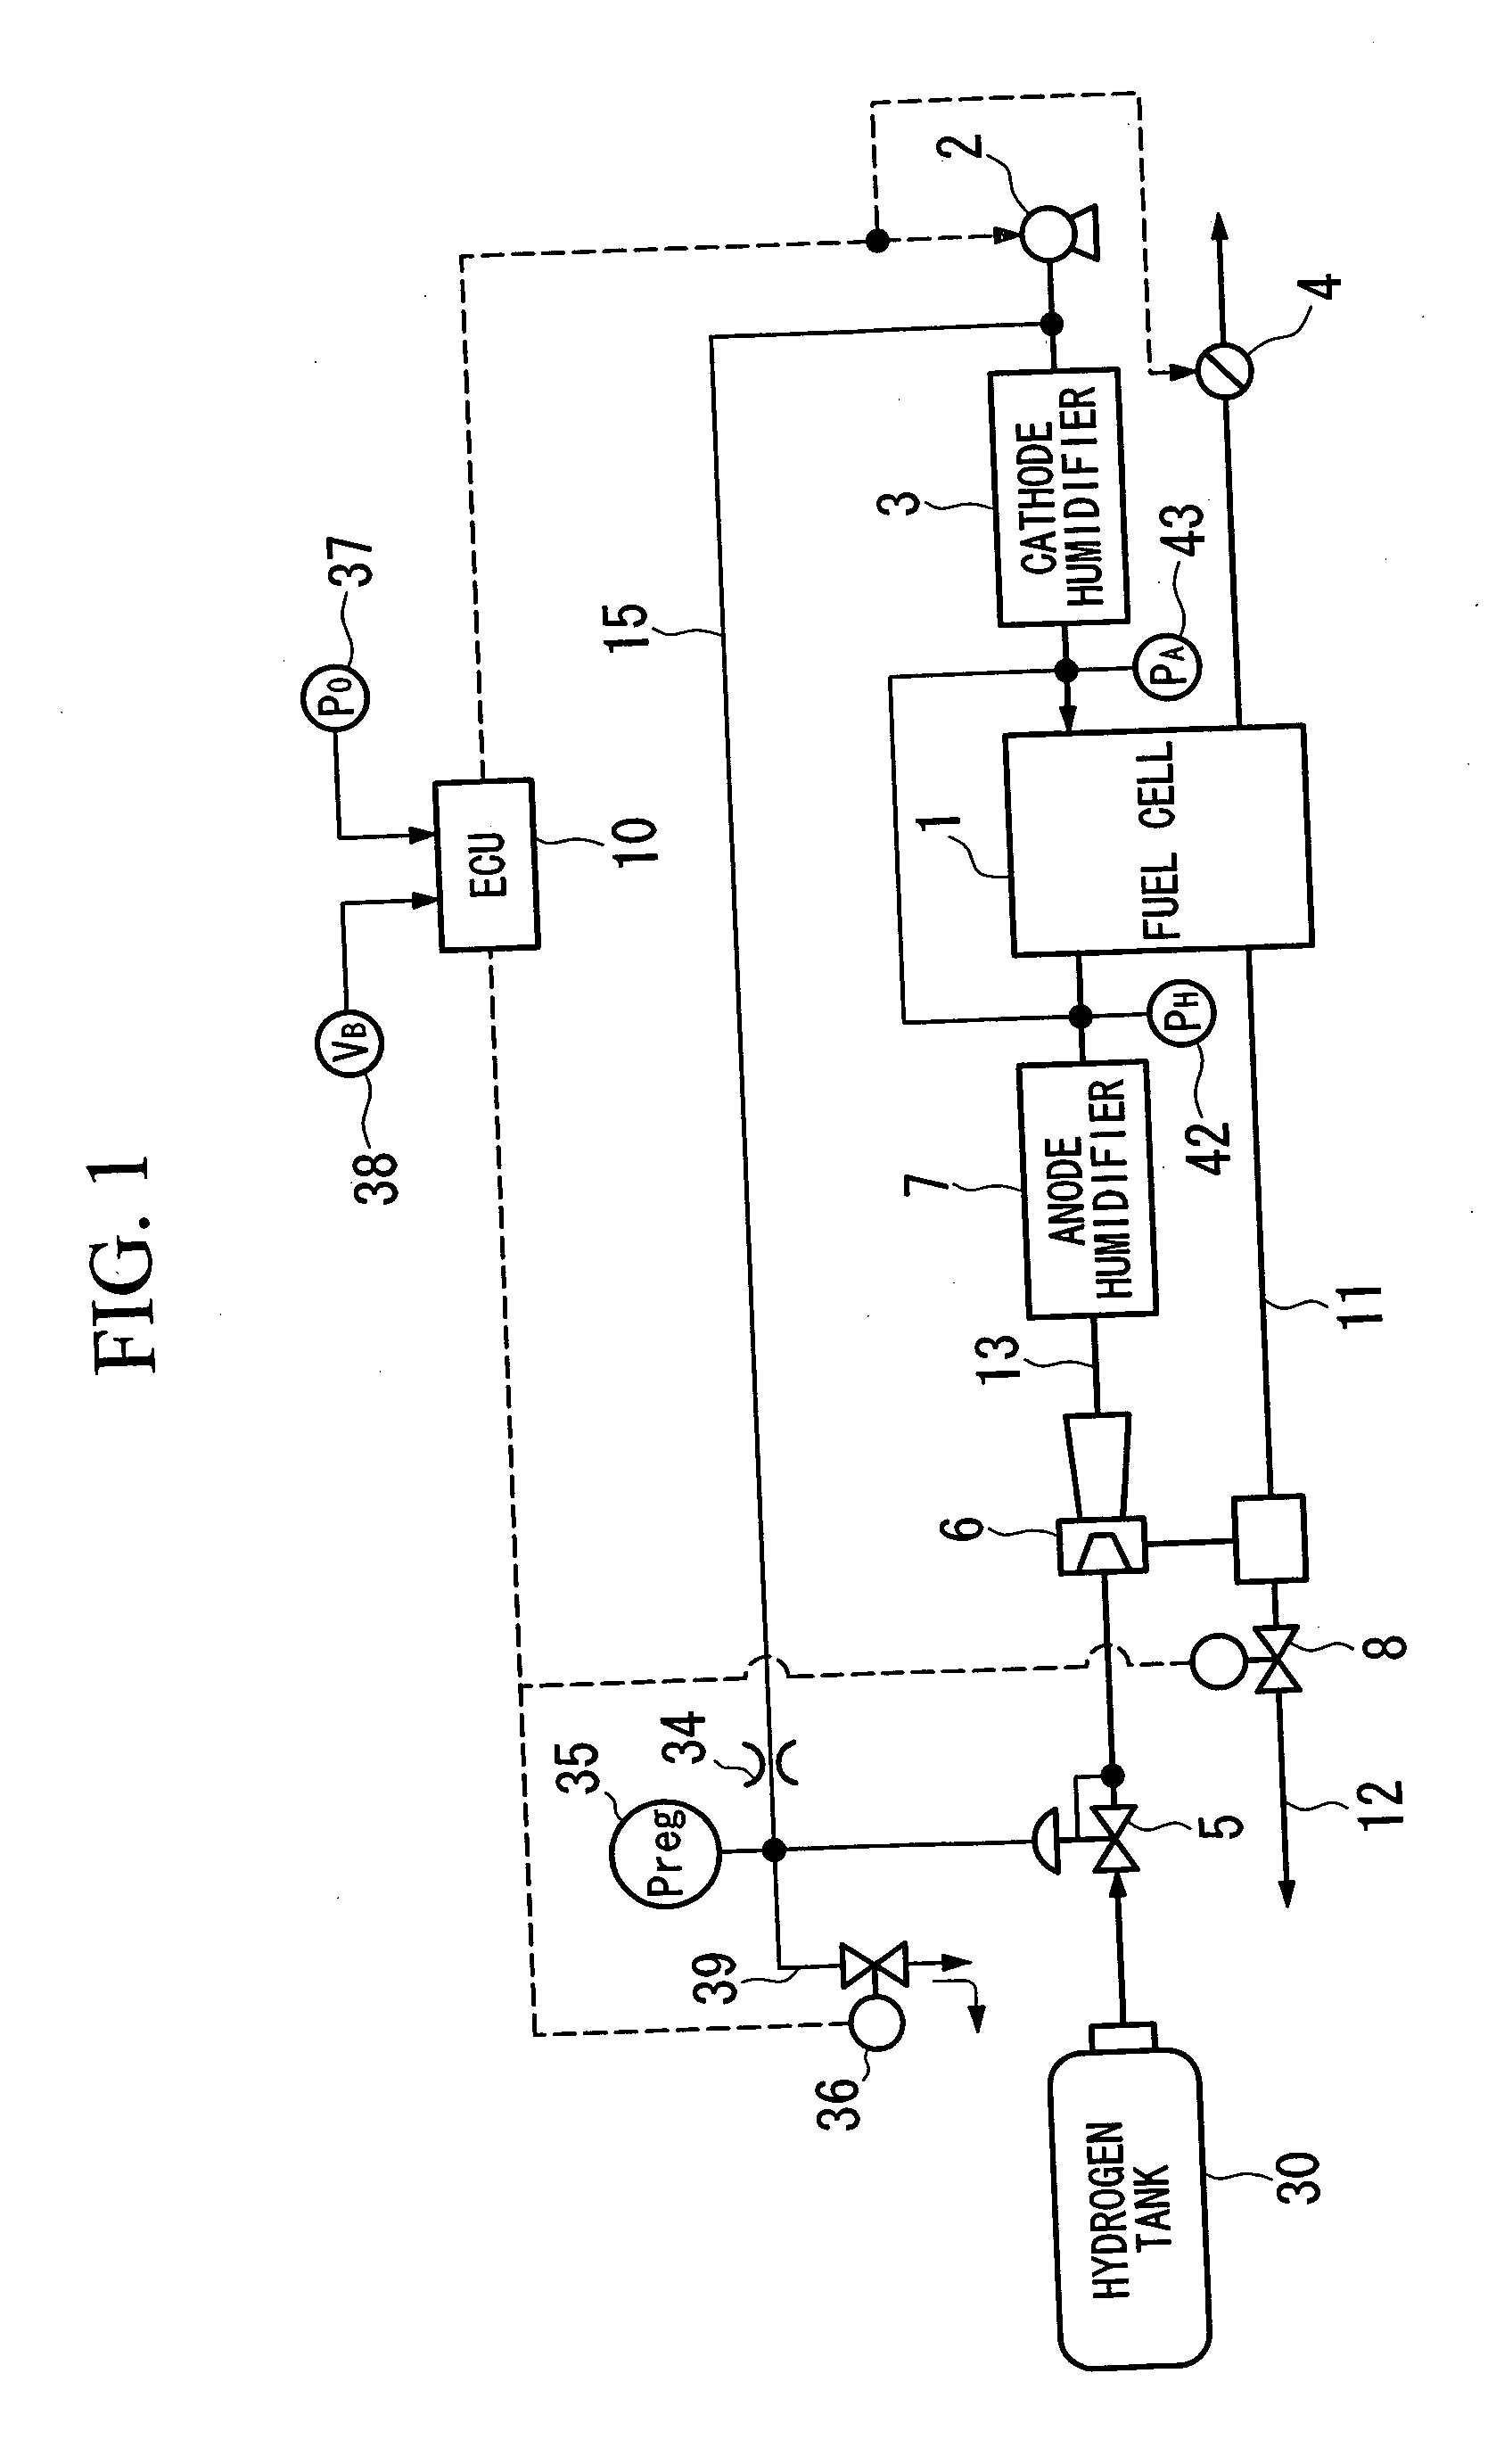 Reaction gas supply apparatus and method for fuel cell